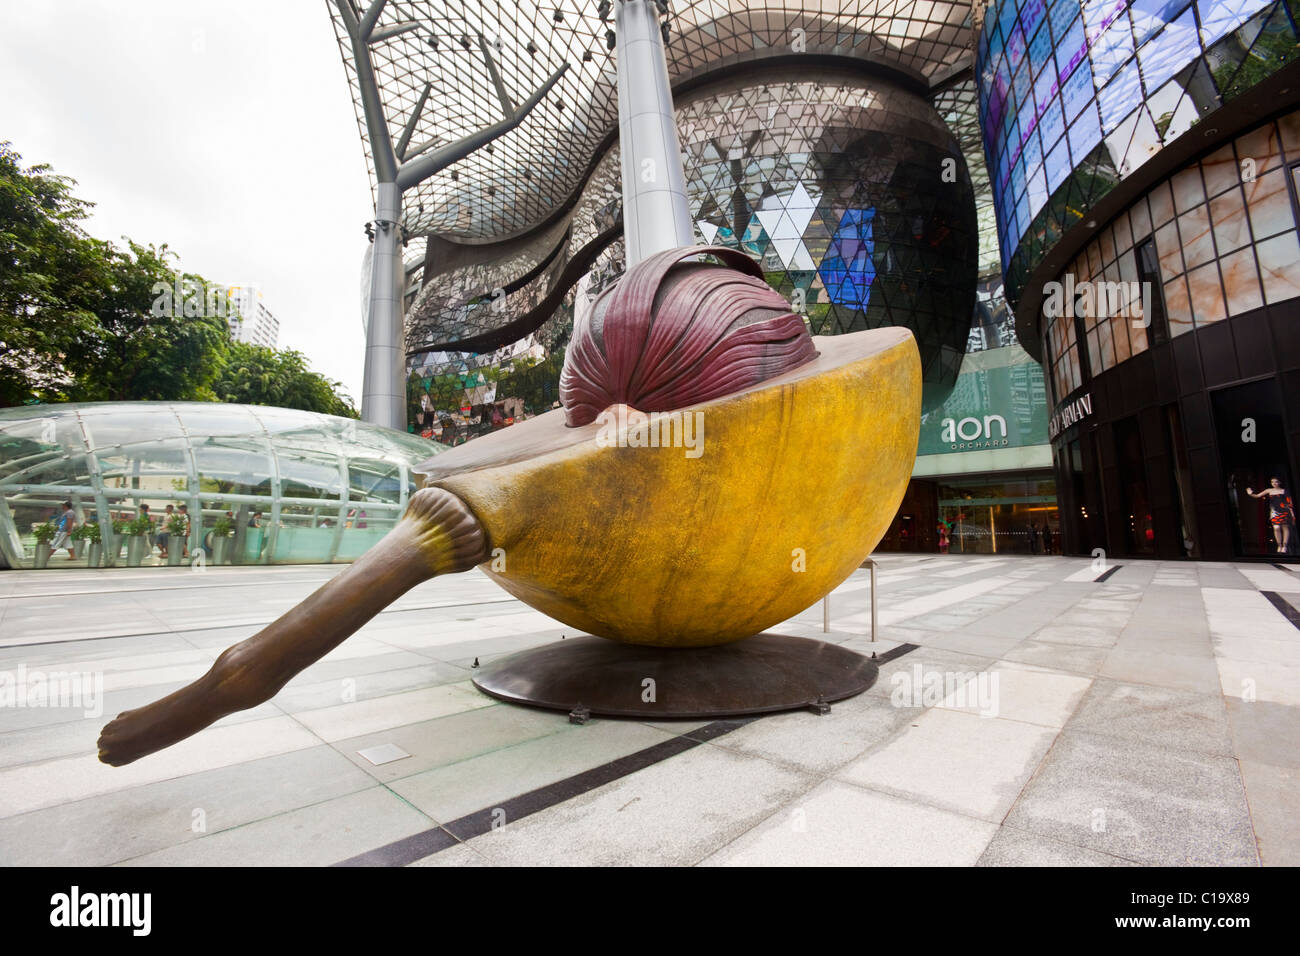 The Nutmeg sculpture by artist Kumari Nahappan at the ION Orchard Mall, Orchard Road, Singapore Stock Photo